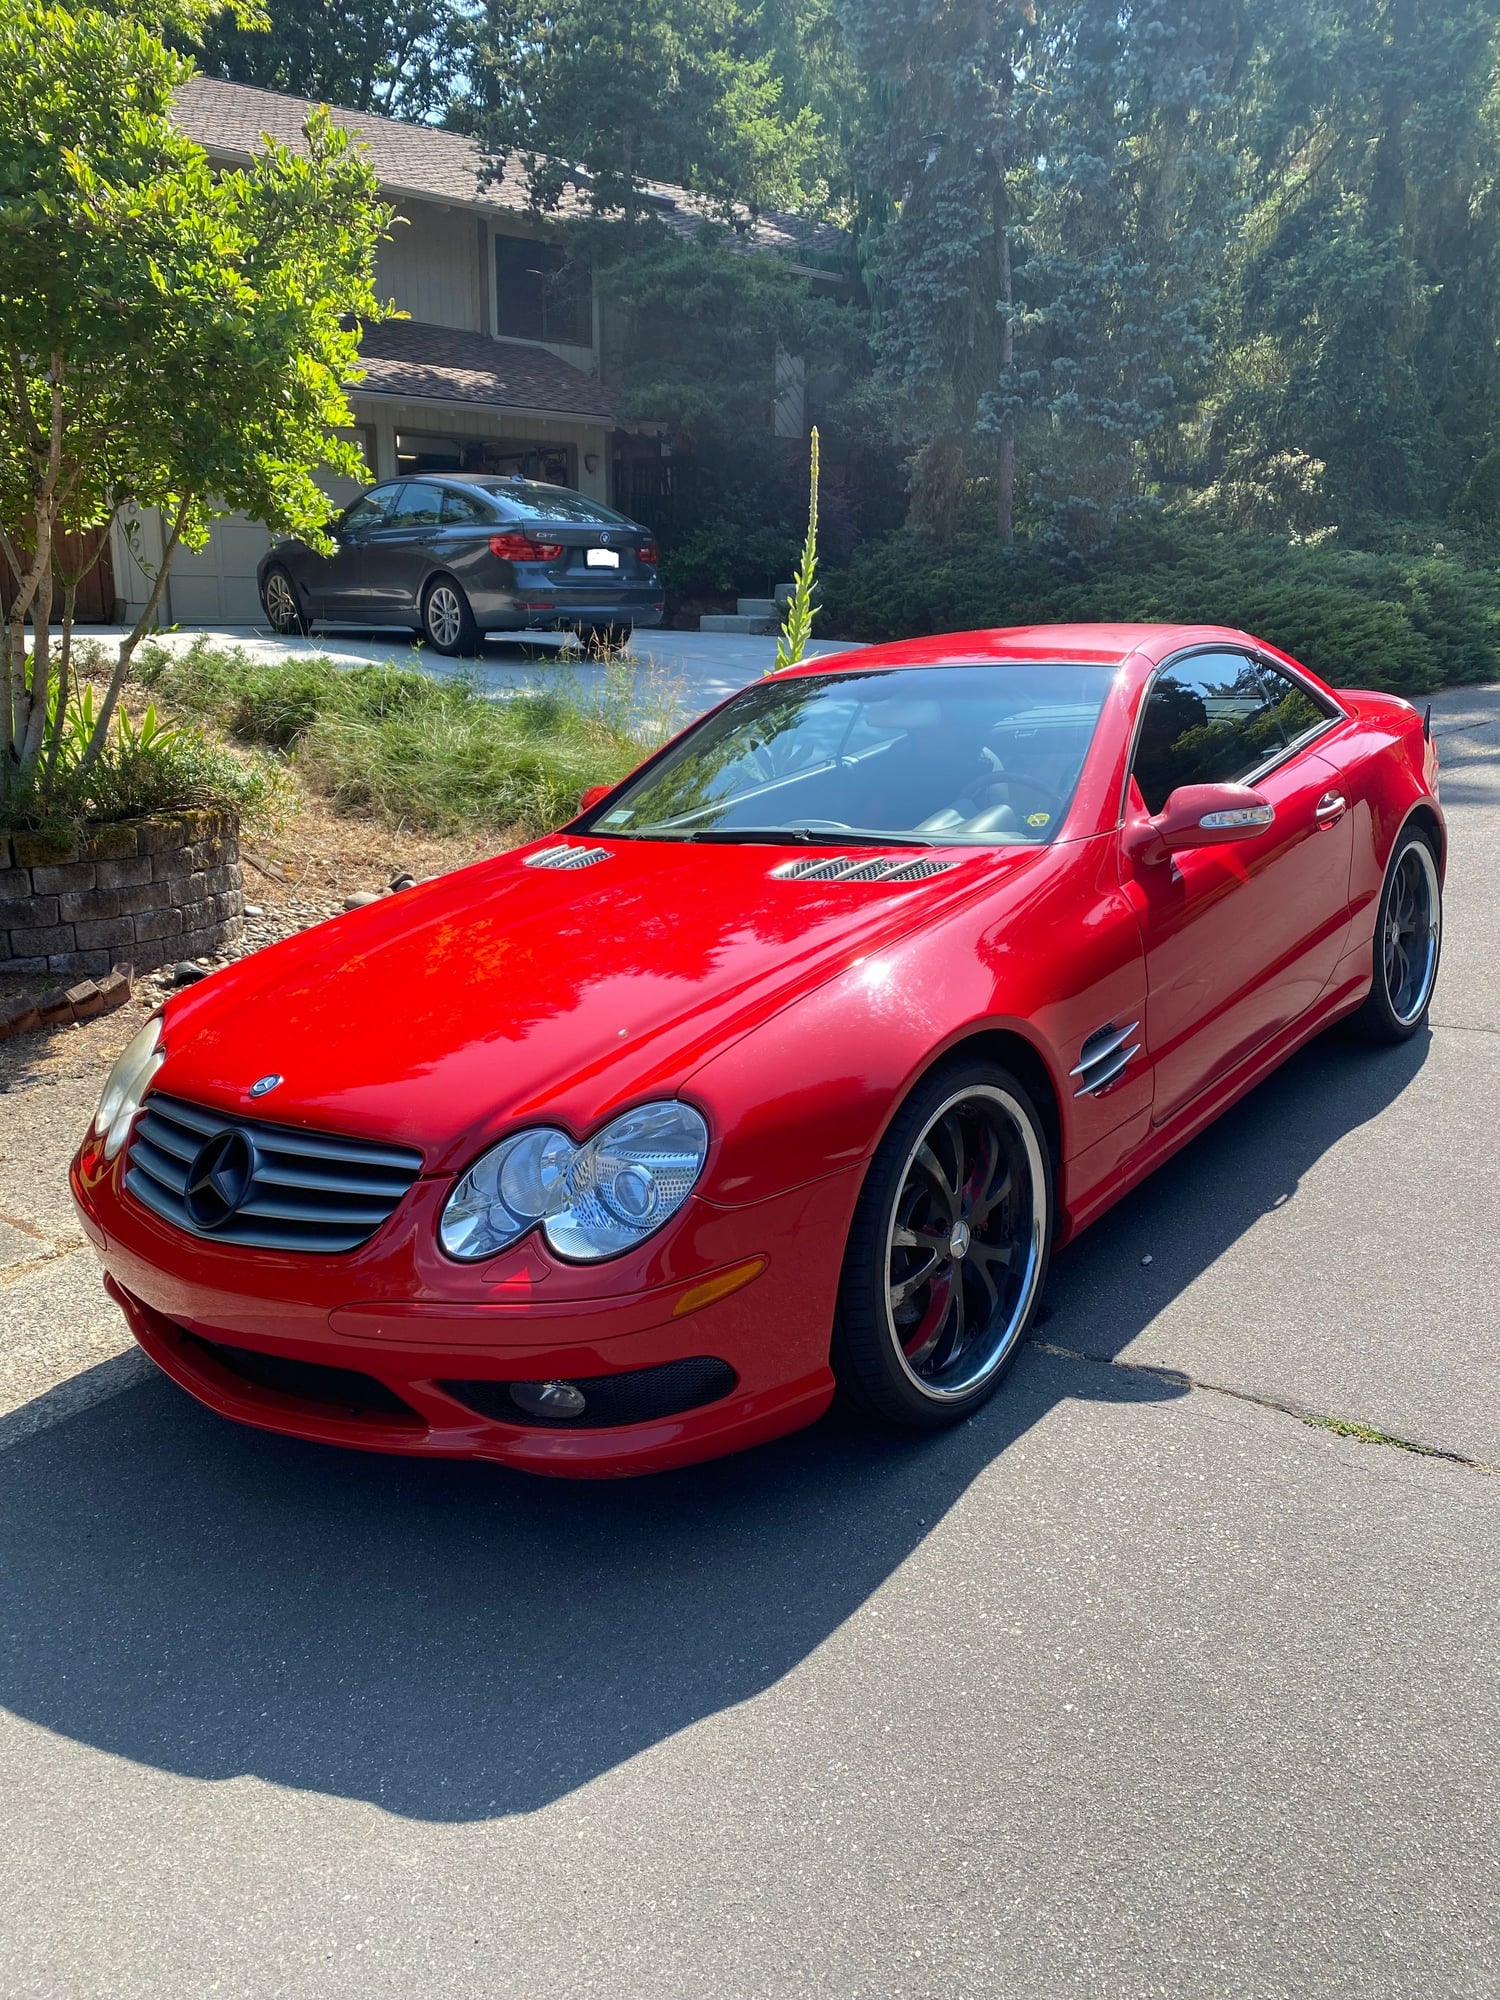 2003 Mercedes-Benz SL500 - 2003 SL500, 98kMiles - Used - VIN WDBSK75F23F023028 - 98,000 Miles - 8 cyl - 2WD - Automatic - Convertible - Red - Seattle, WA 98033, United States